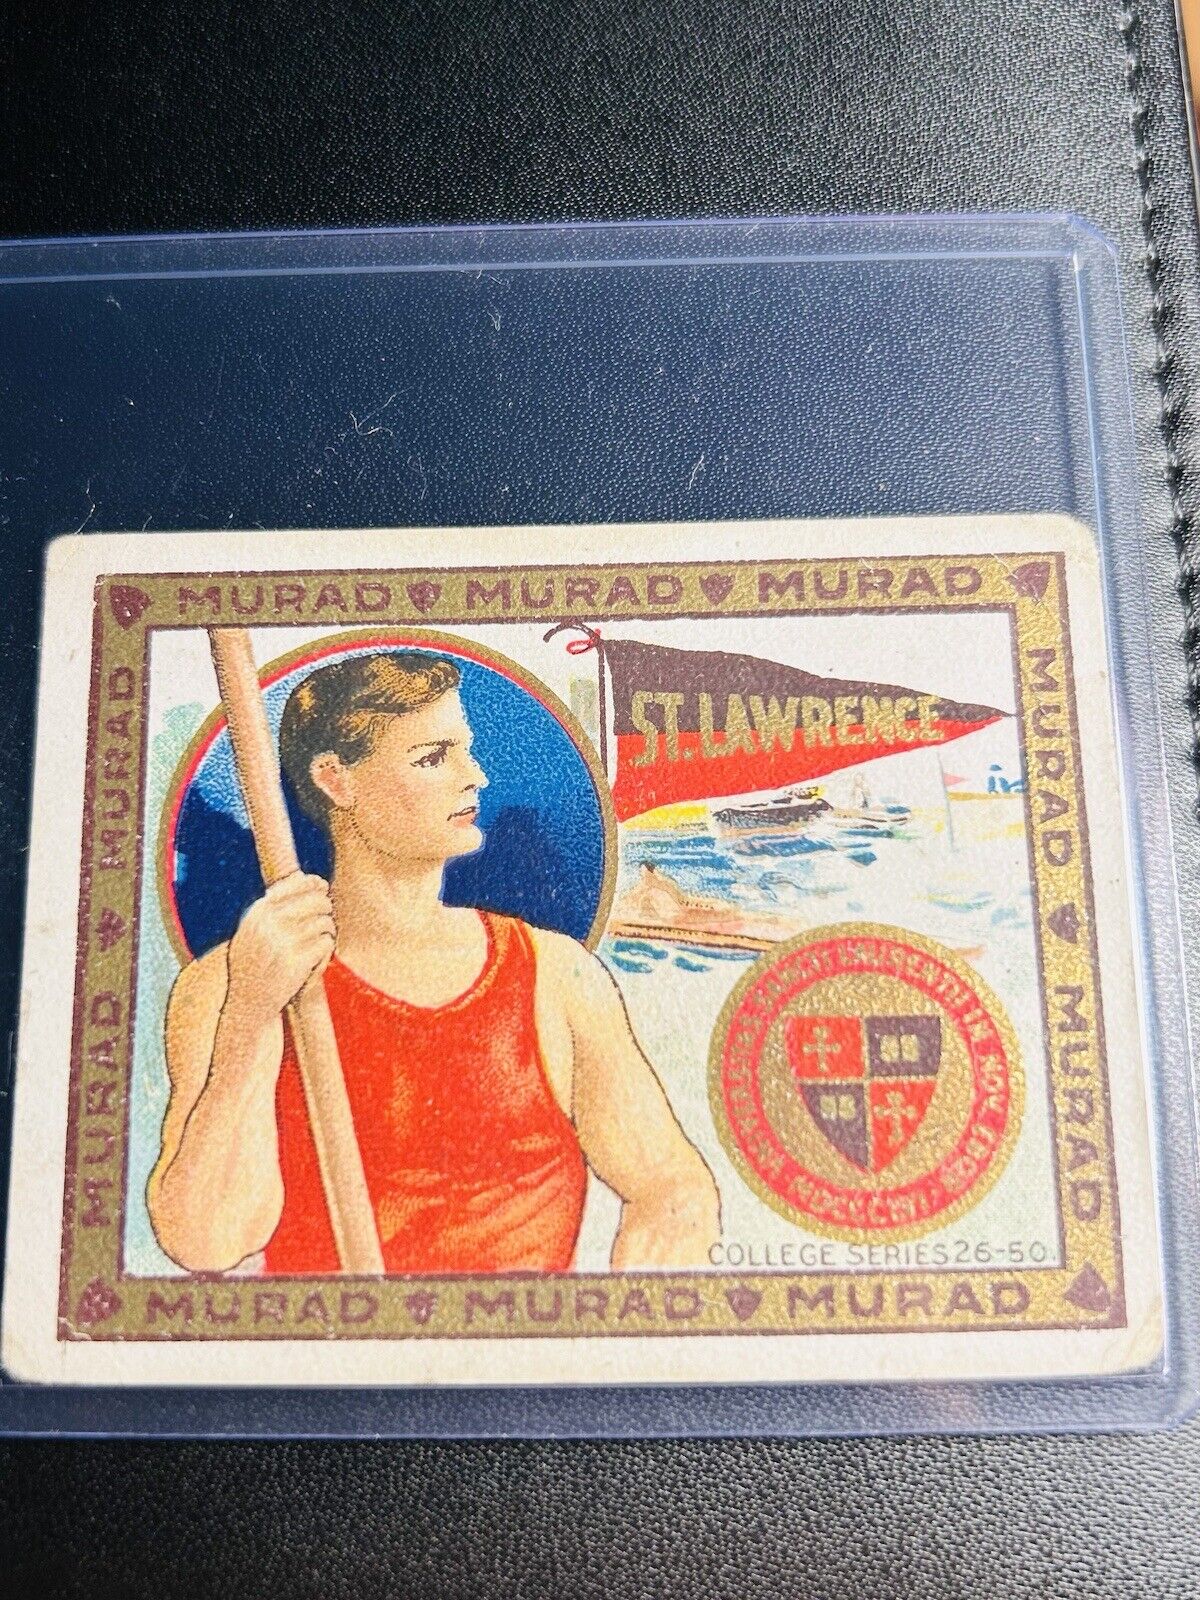 1910s T51 Murad Cigarettes - St Lawrence - College Series - New To Market